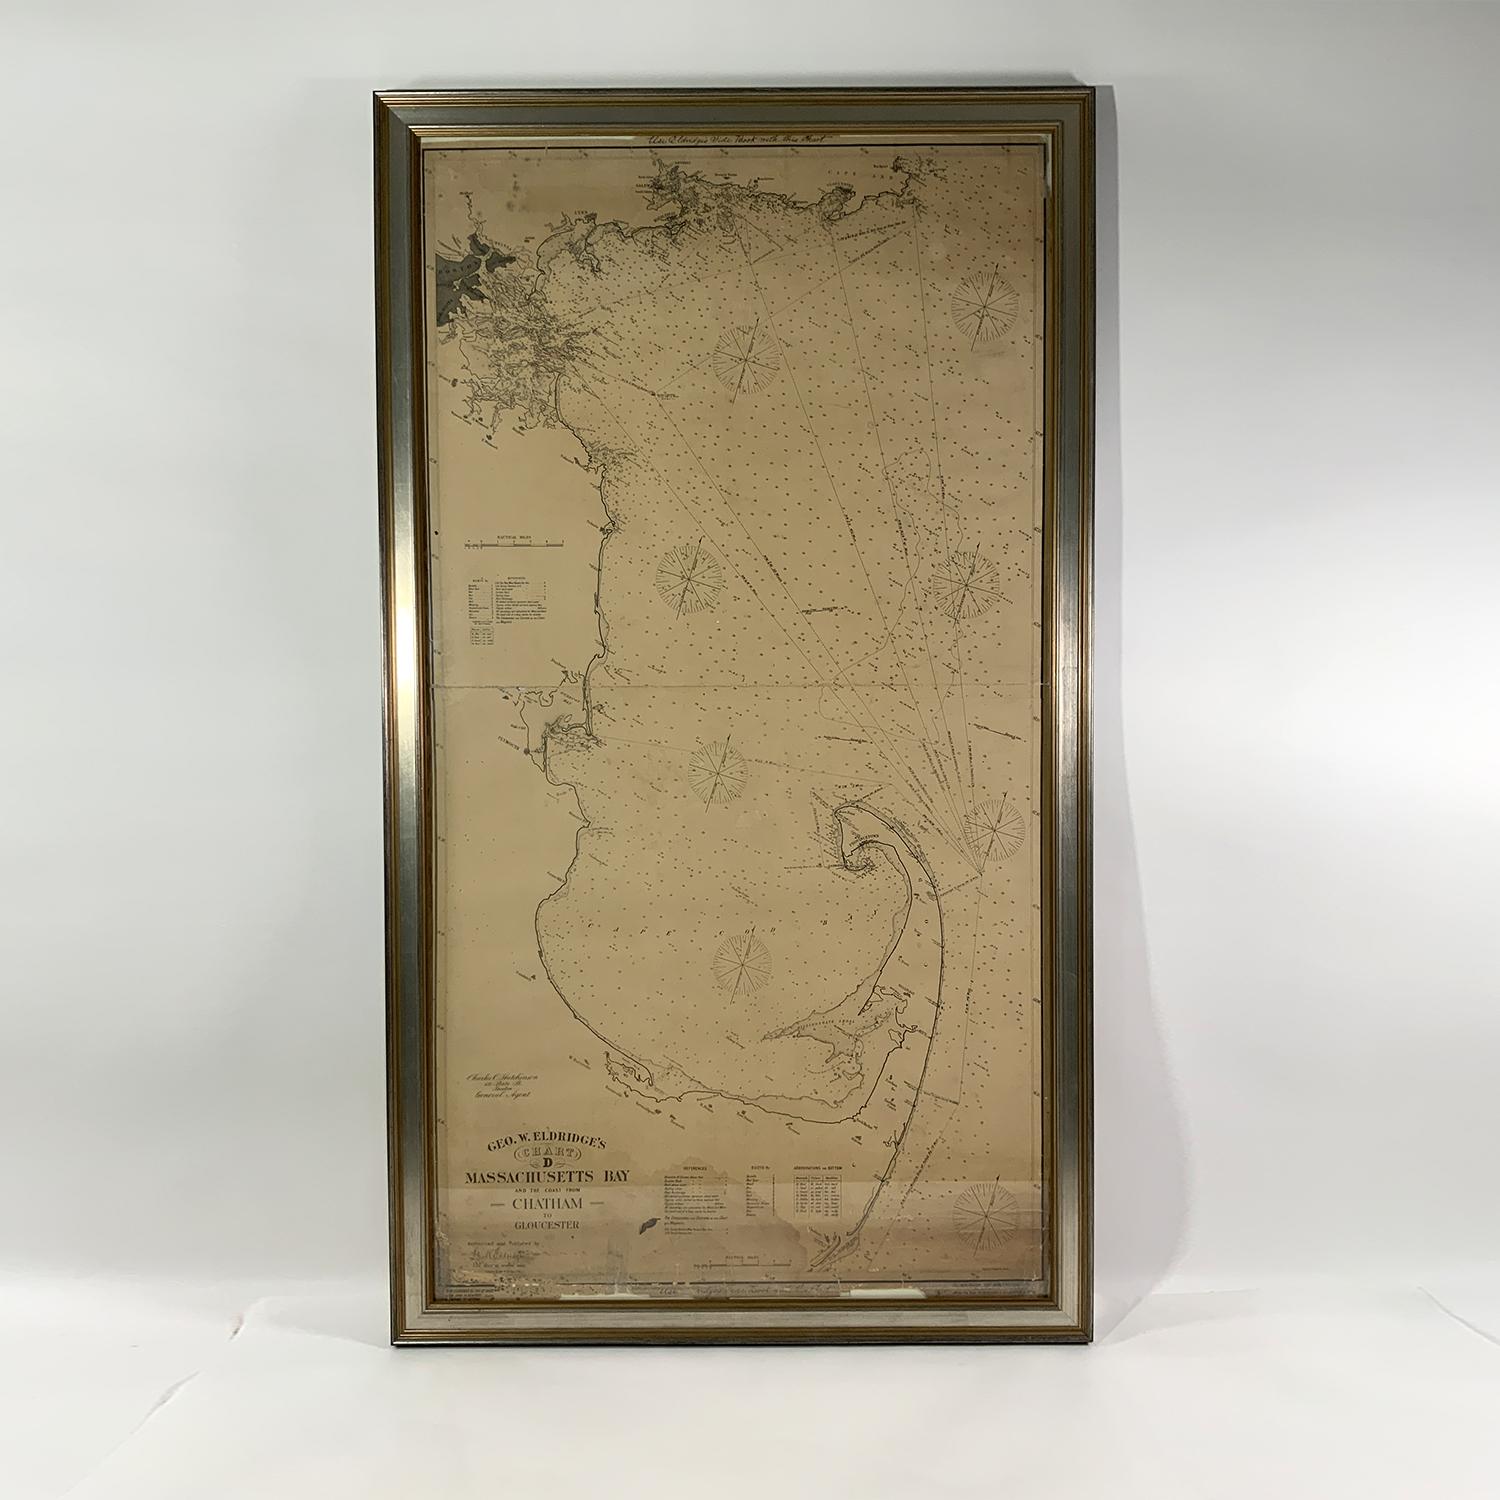 Cape Cod Bay chart from 1907 by George W. Eldridge. This is chart 